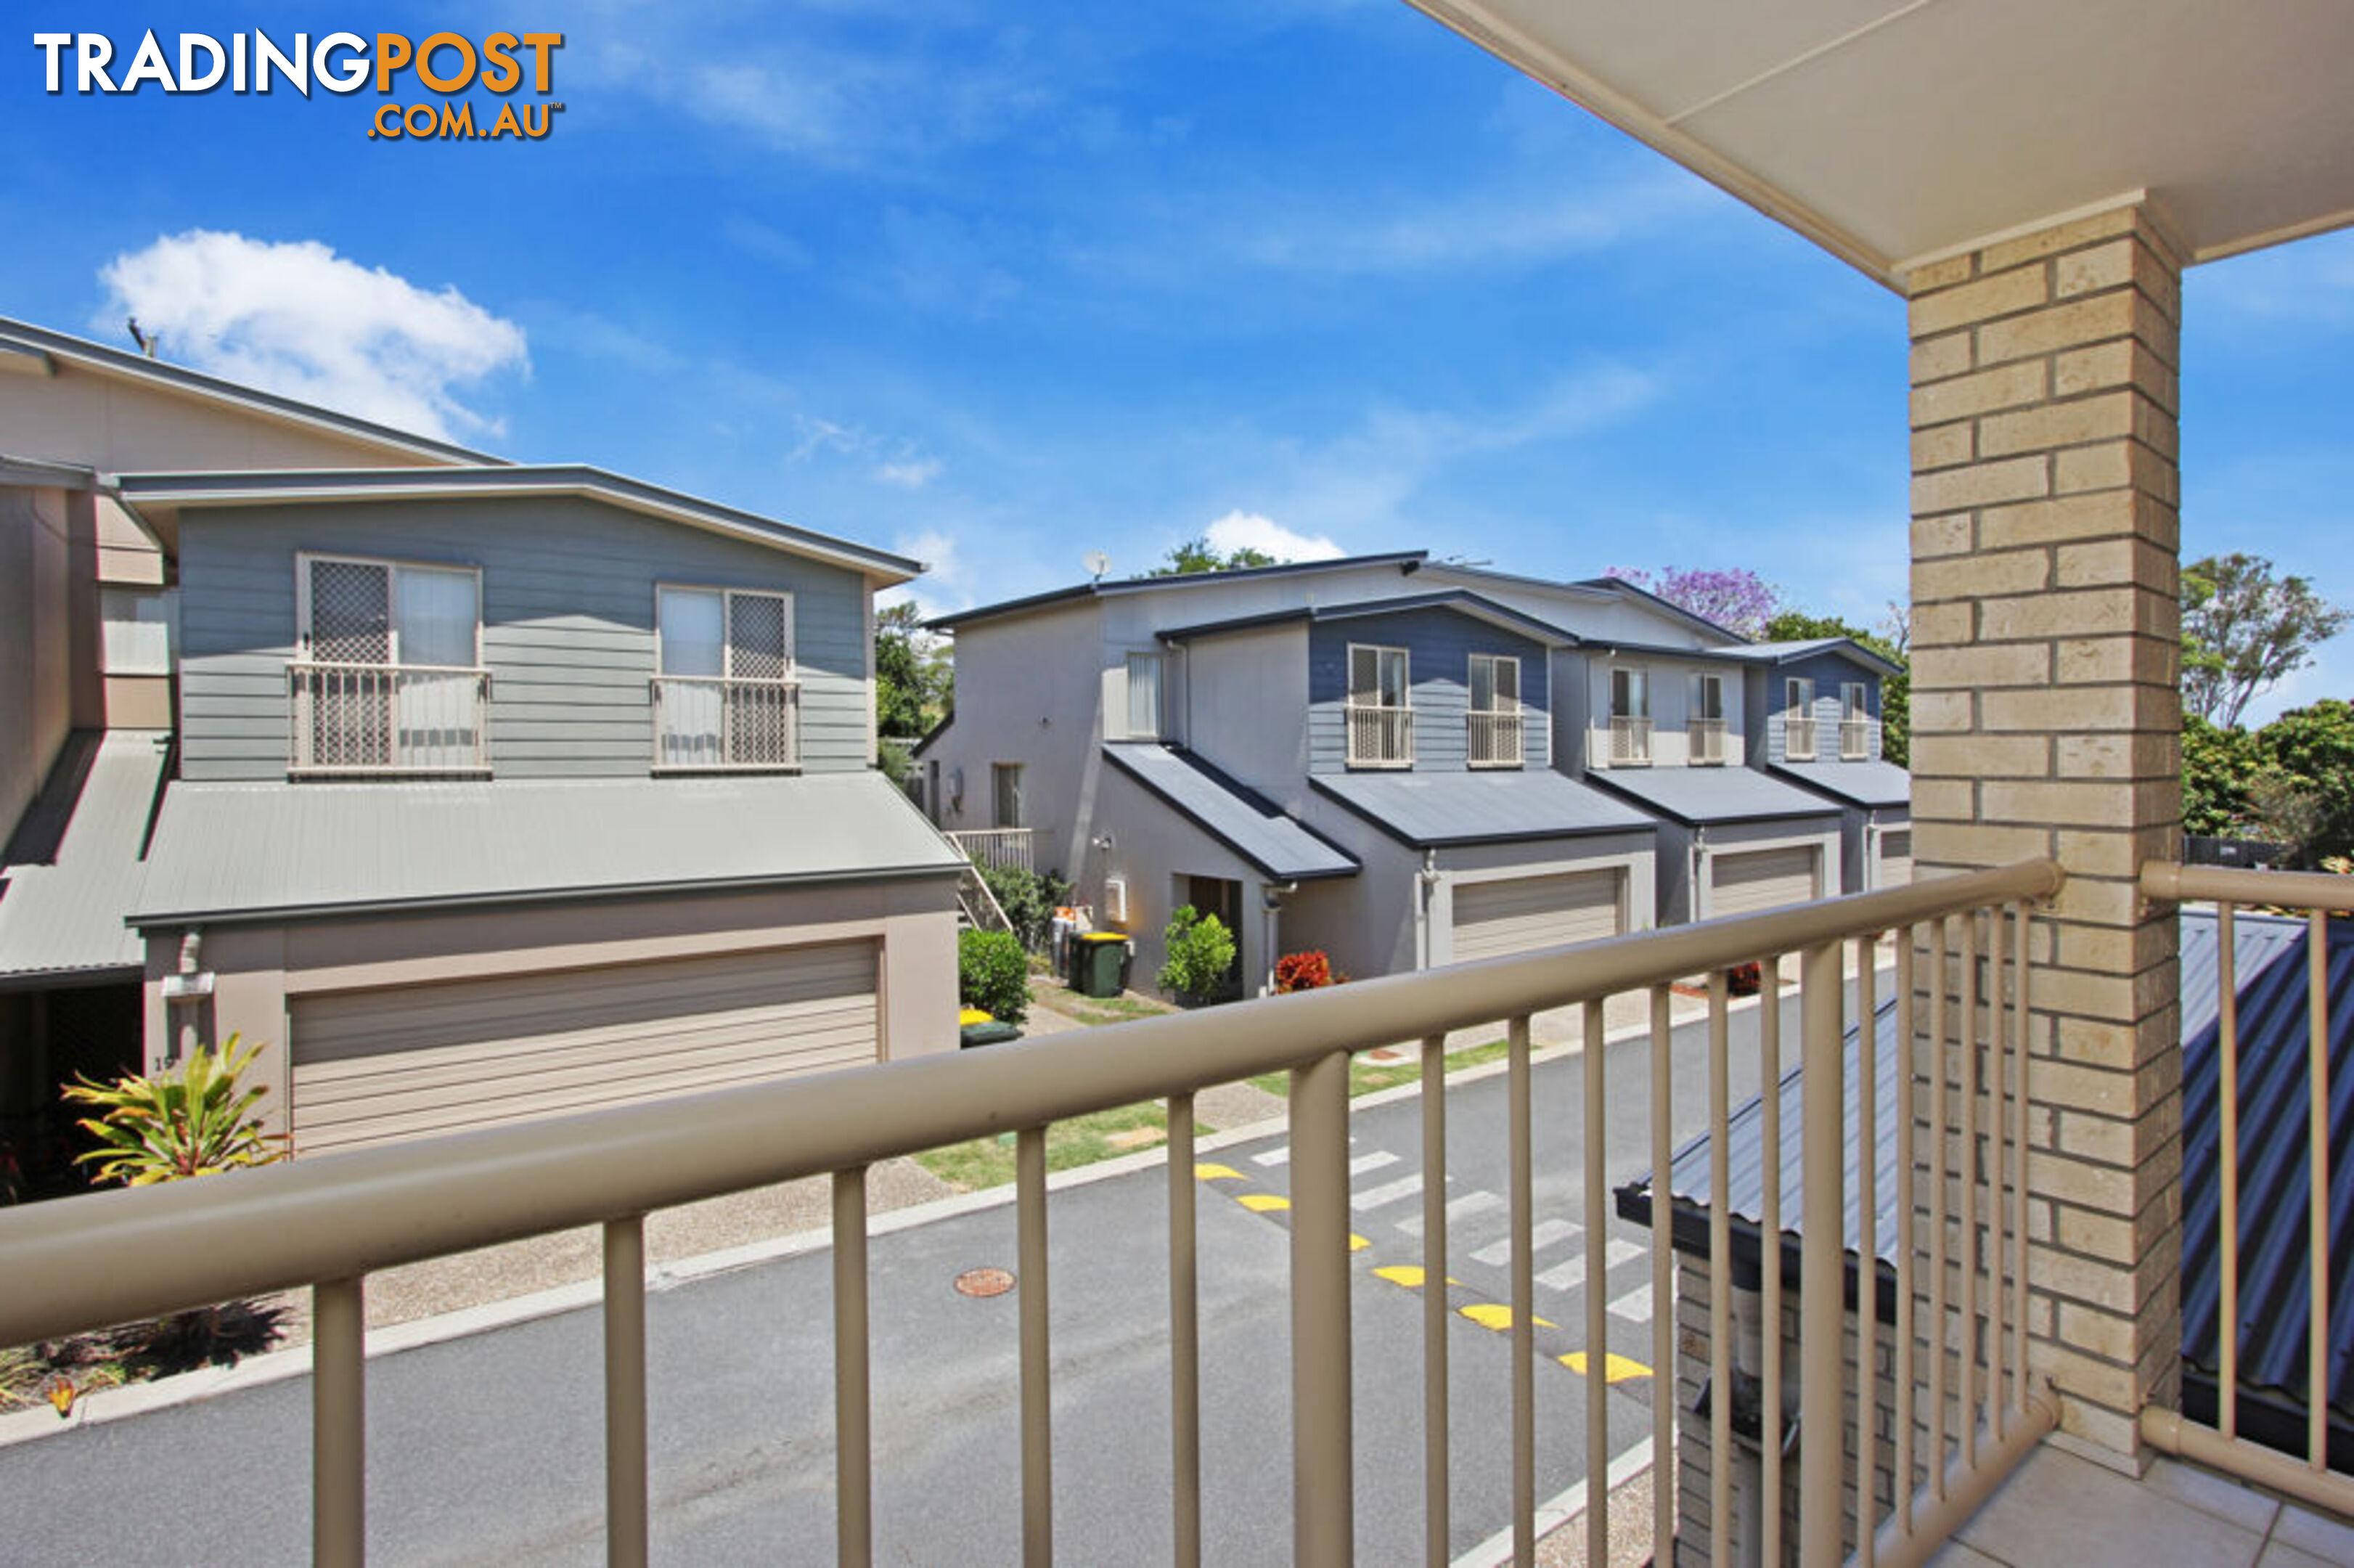 19/110 Orchard Road RICHLANDS QLD 4077